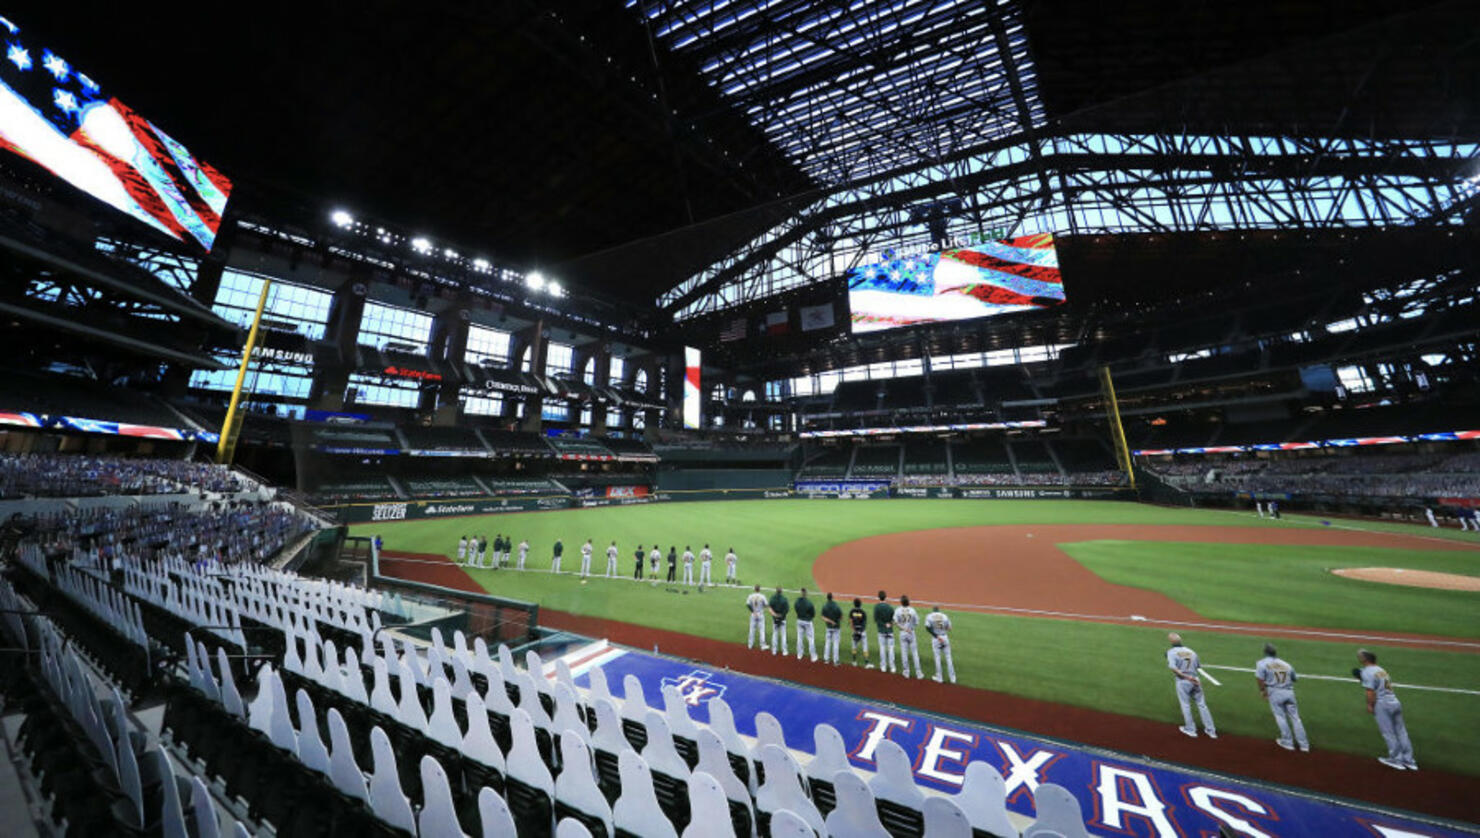 Texas Rangers update their policies for games at Globe Life Field